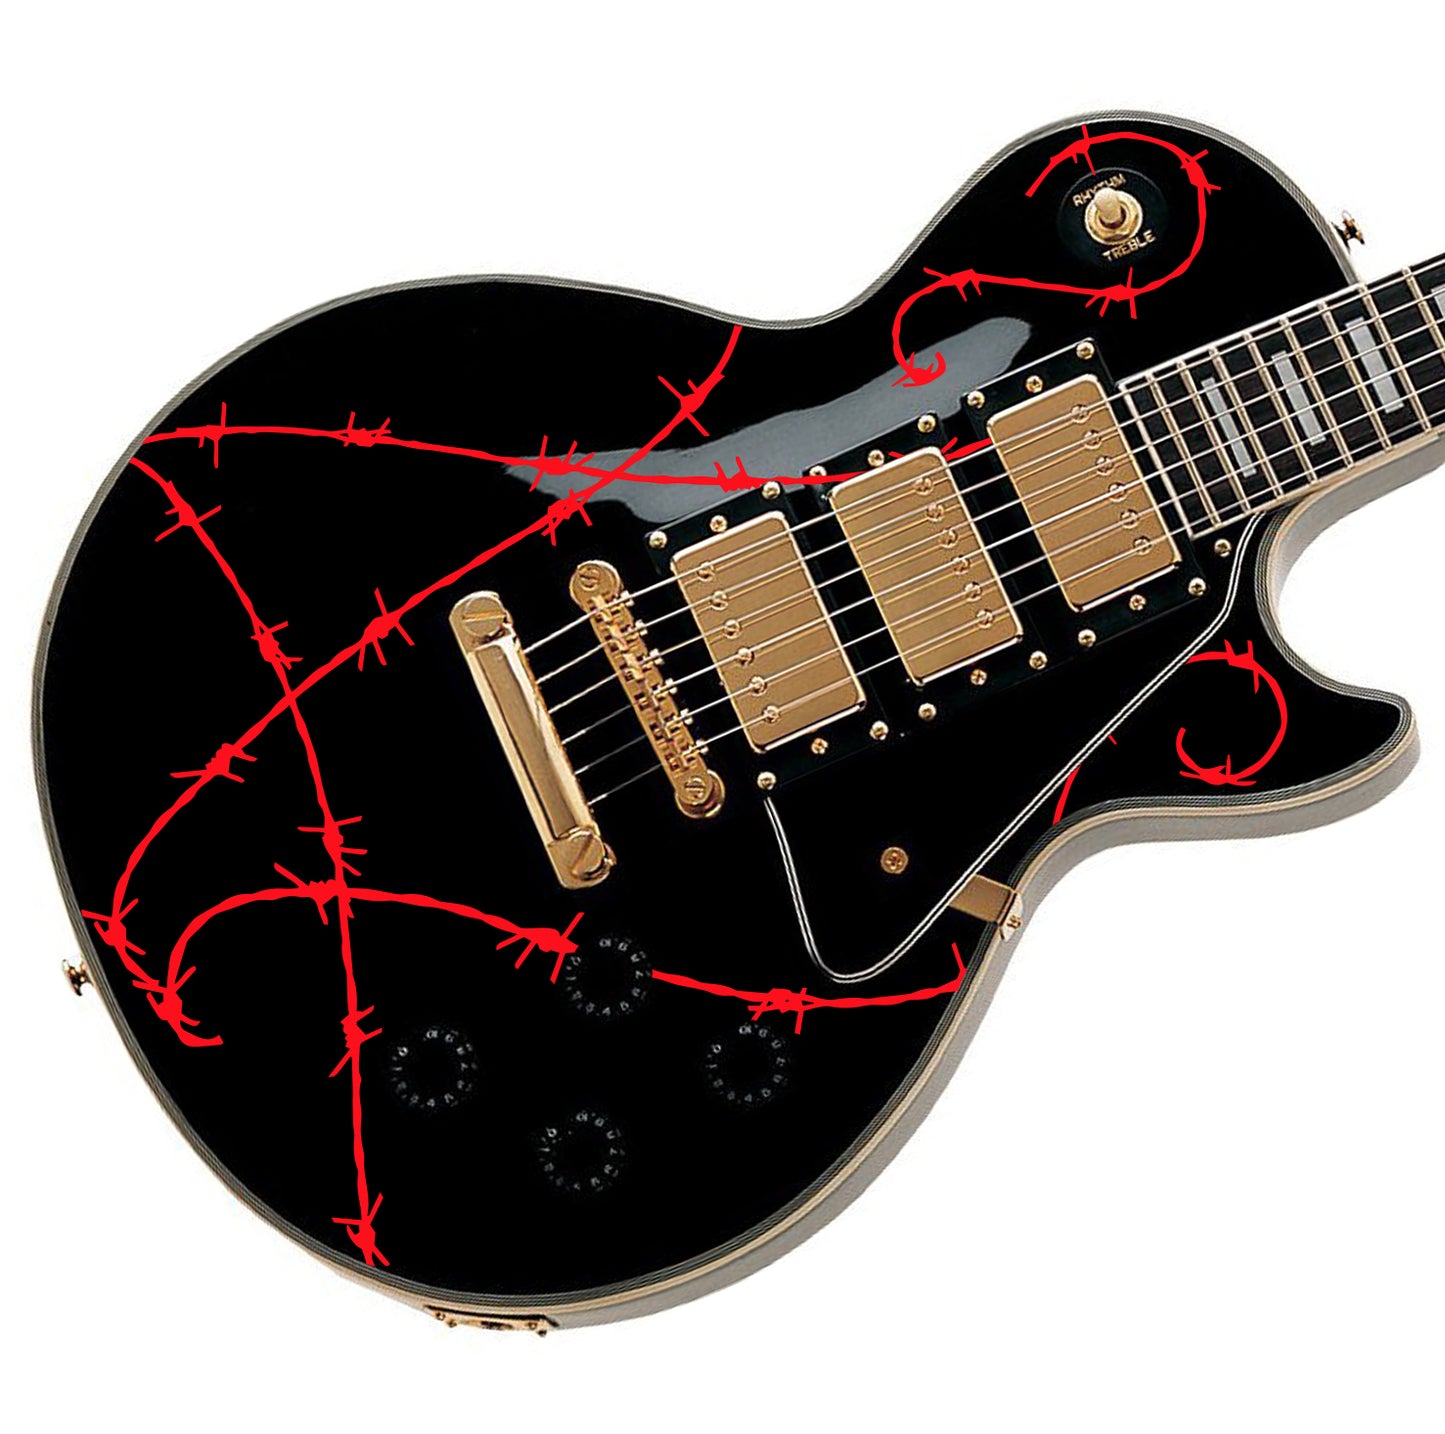 Awesome Barb Wire. Guitar Vinyl Matte Decal Sticker. Colour Options Available.